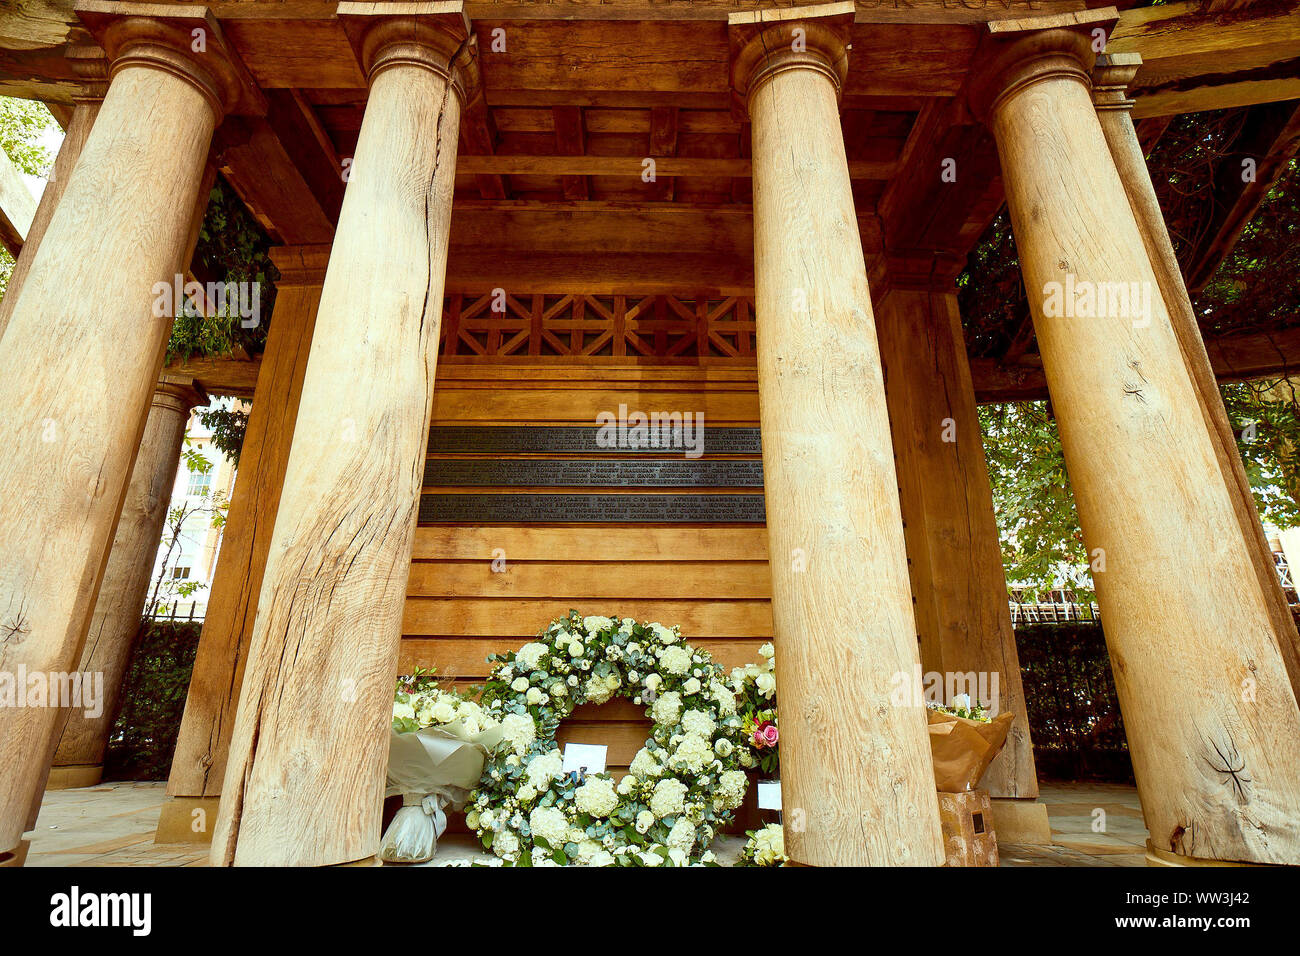 London, U.K. - September 12, 2019: Flowers placed at the September 11 Memorial Garden in Grosvenor Square for the 18th annoiversary of the 9/11 attack. Stock Photo